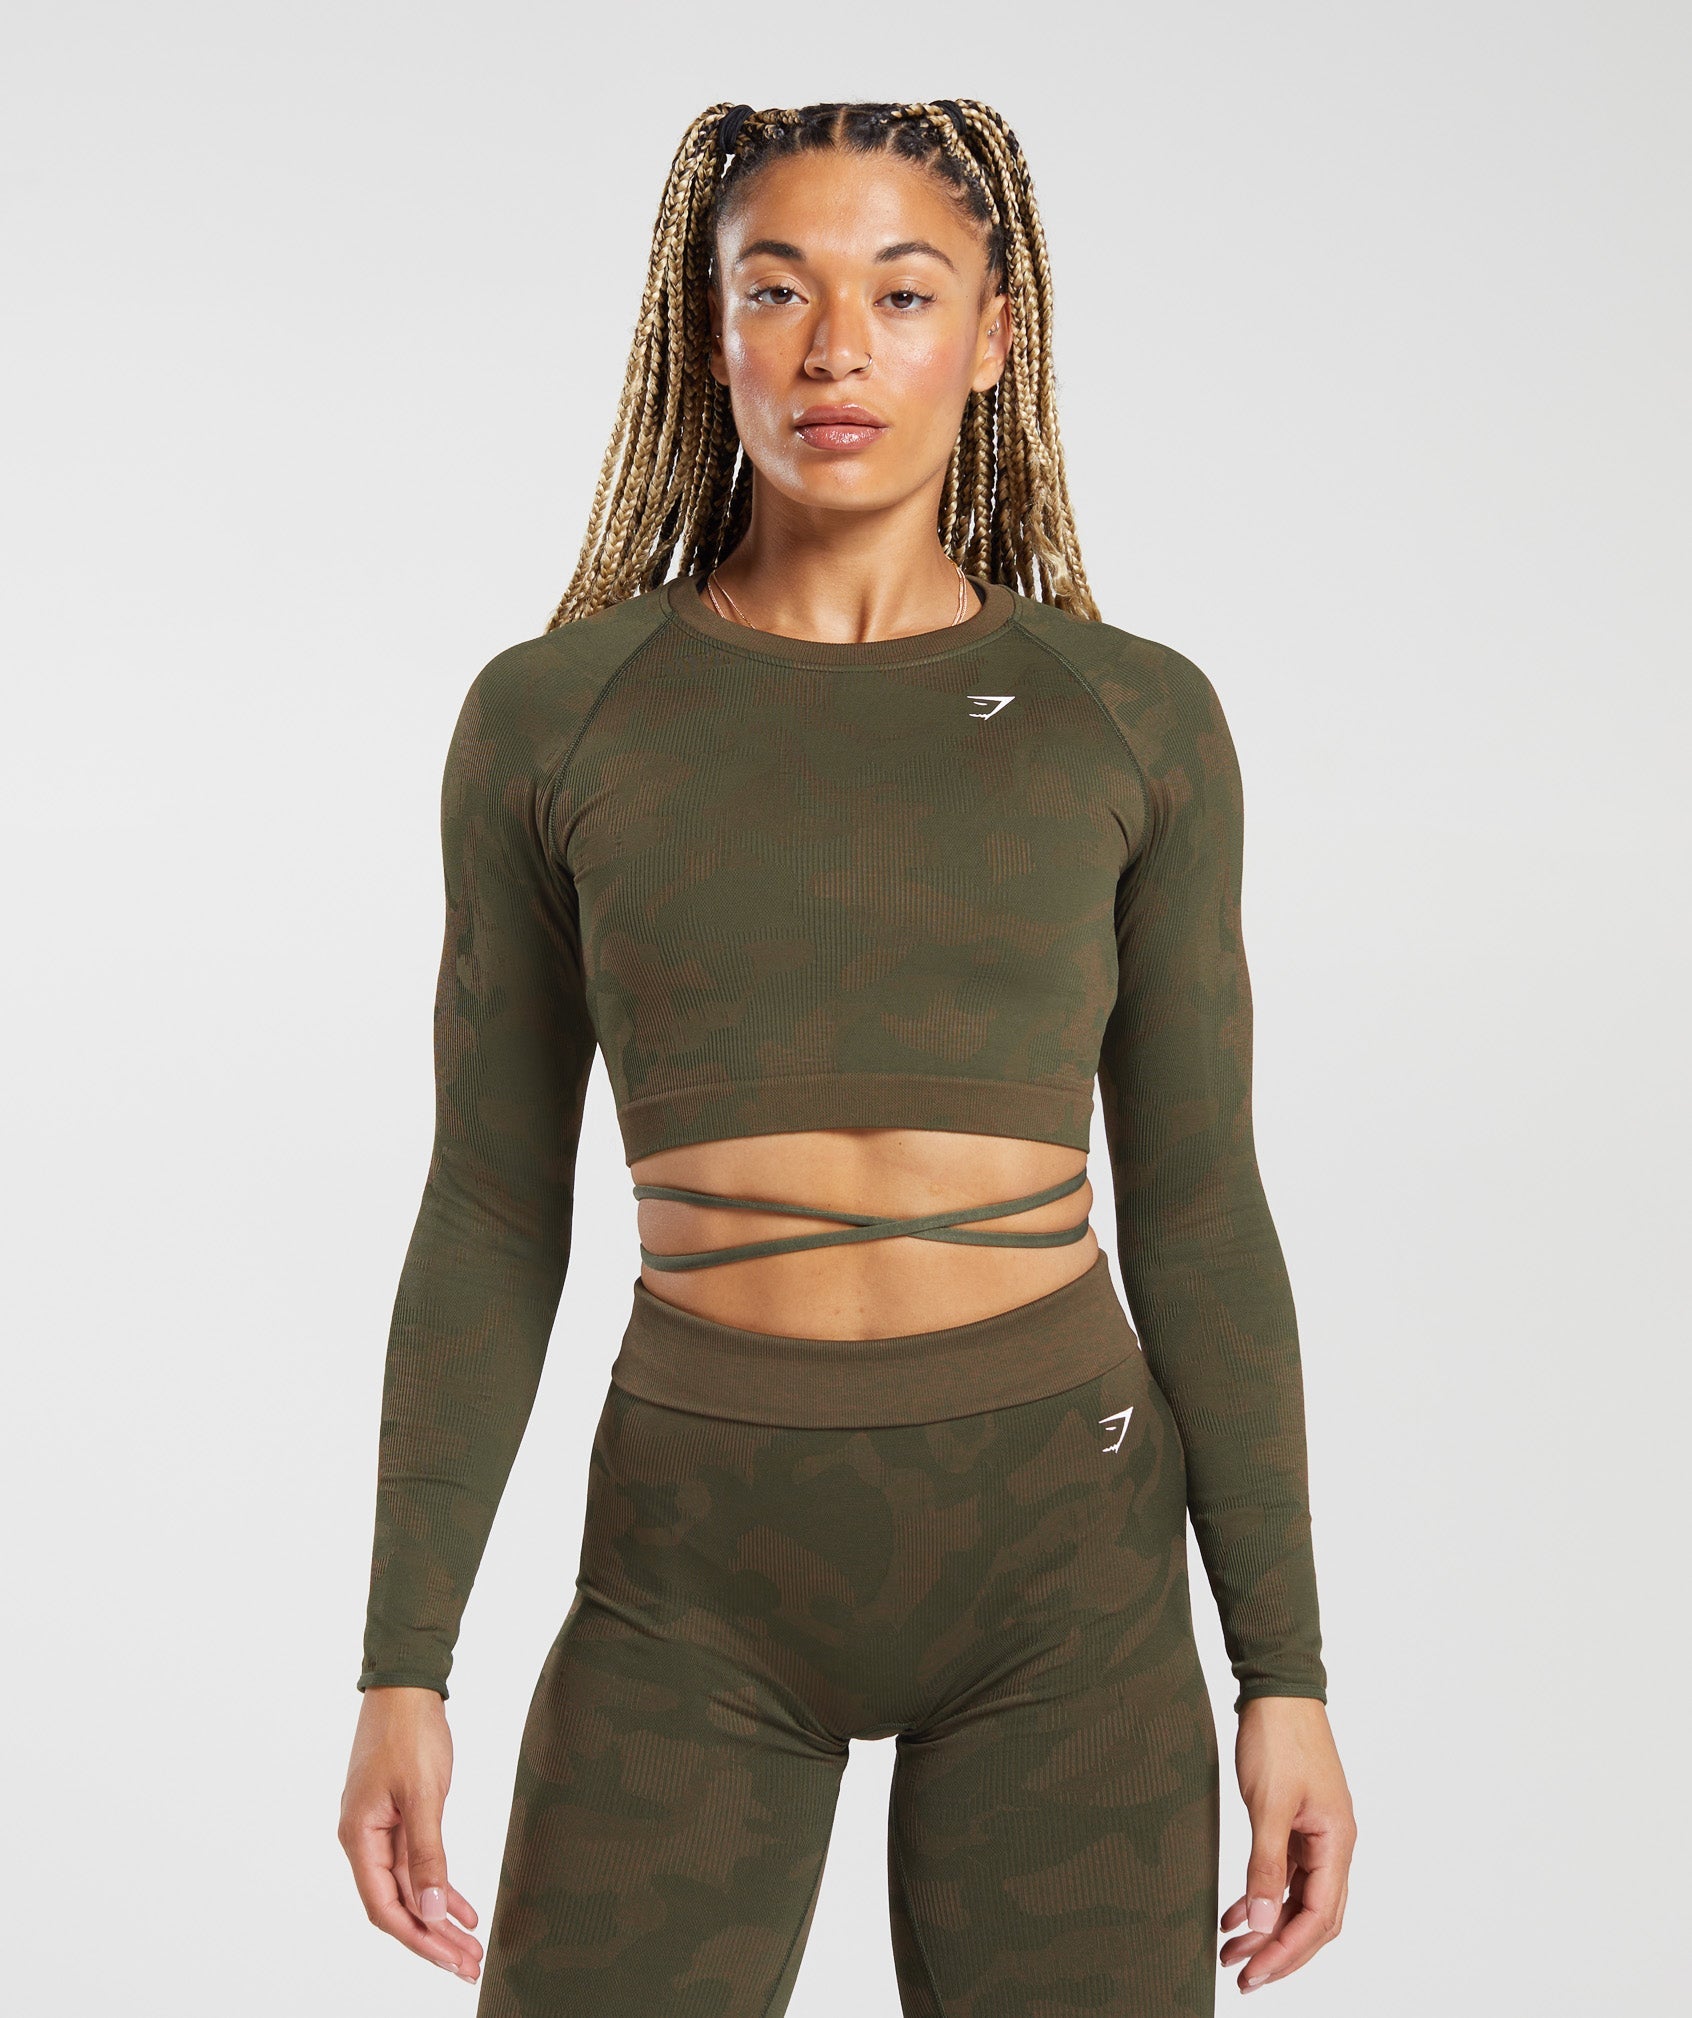 New Gymshark Adapt Camo Seamless Leggings Women's Olive Green Size Small :  r/gym_apparel_for_women